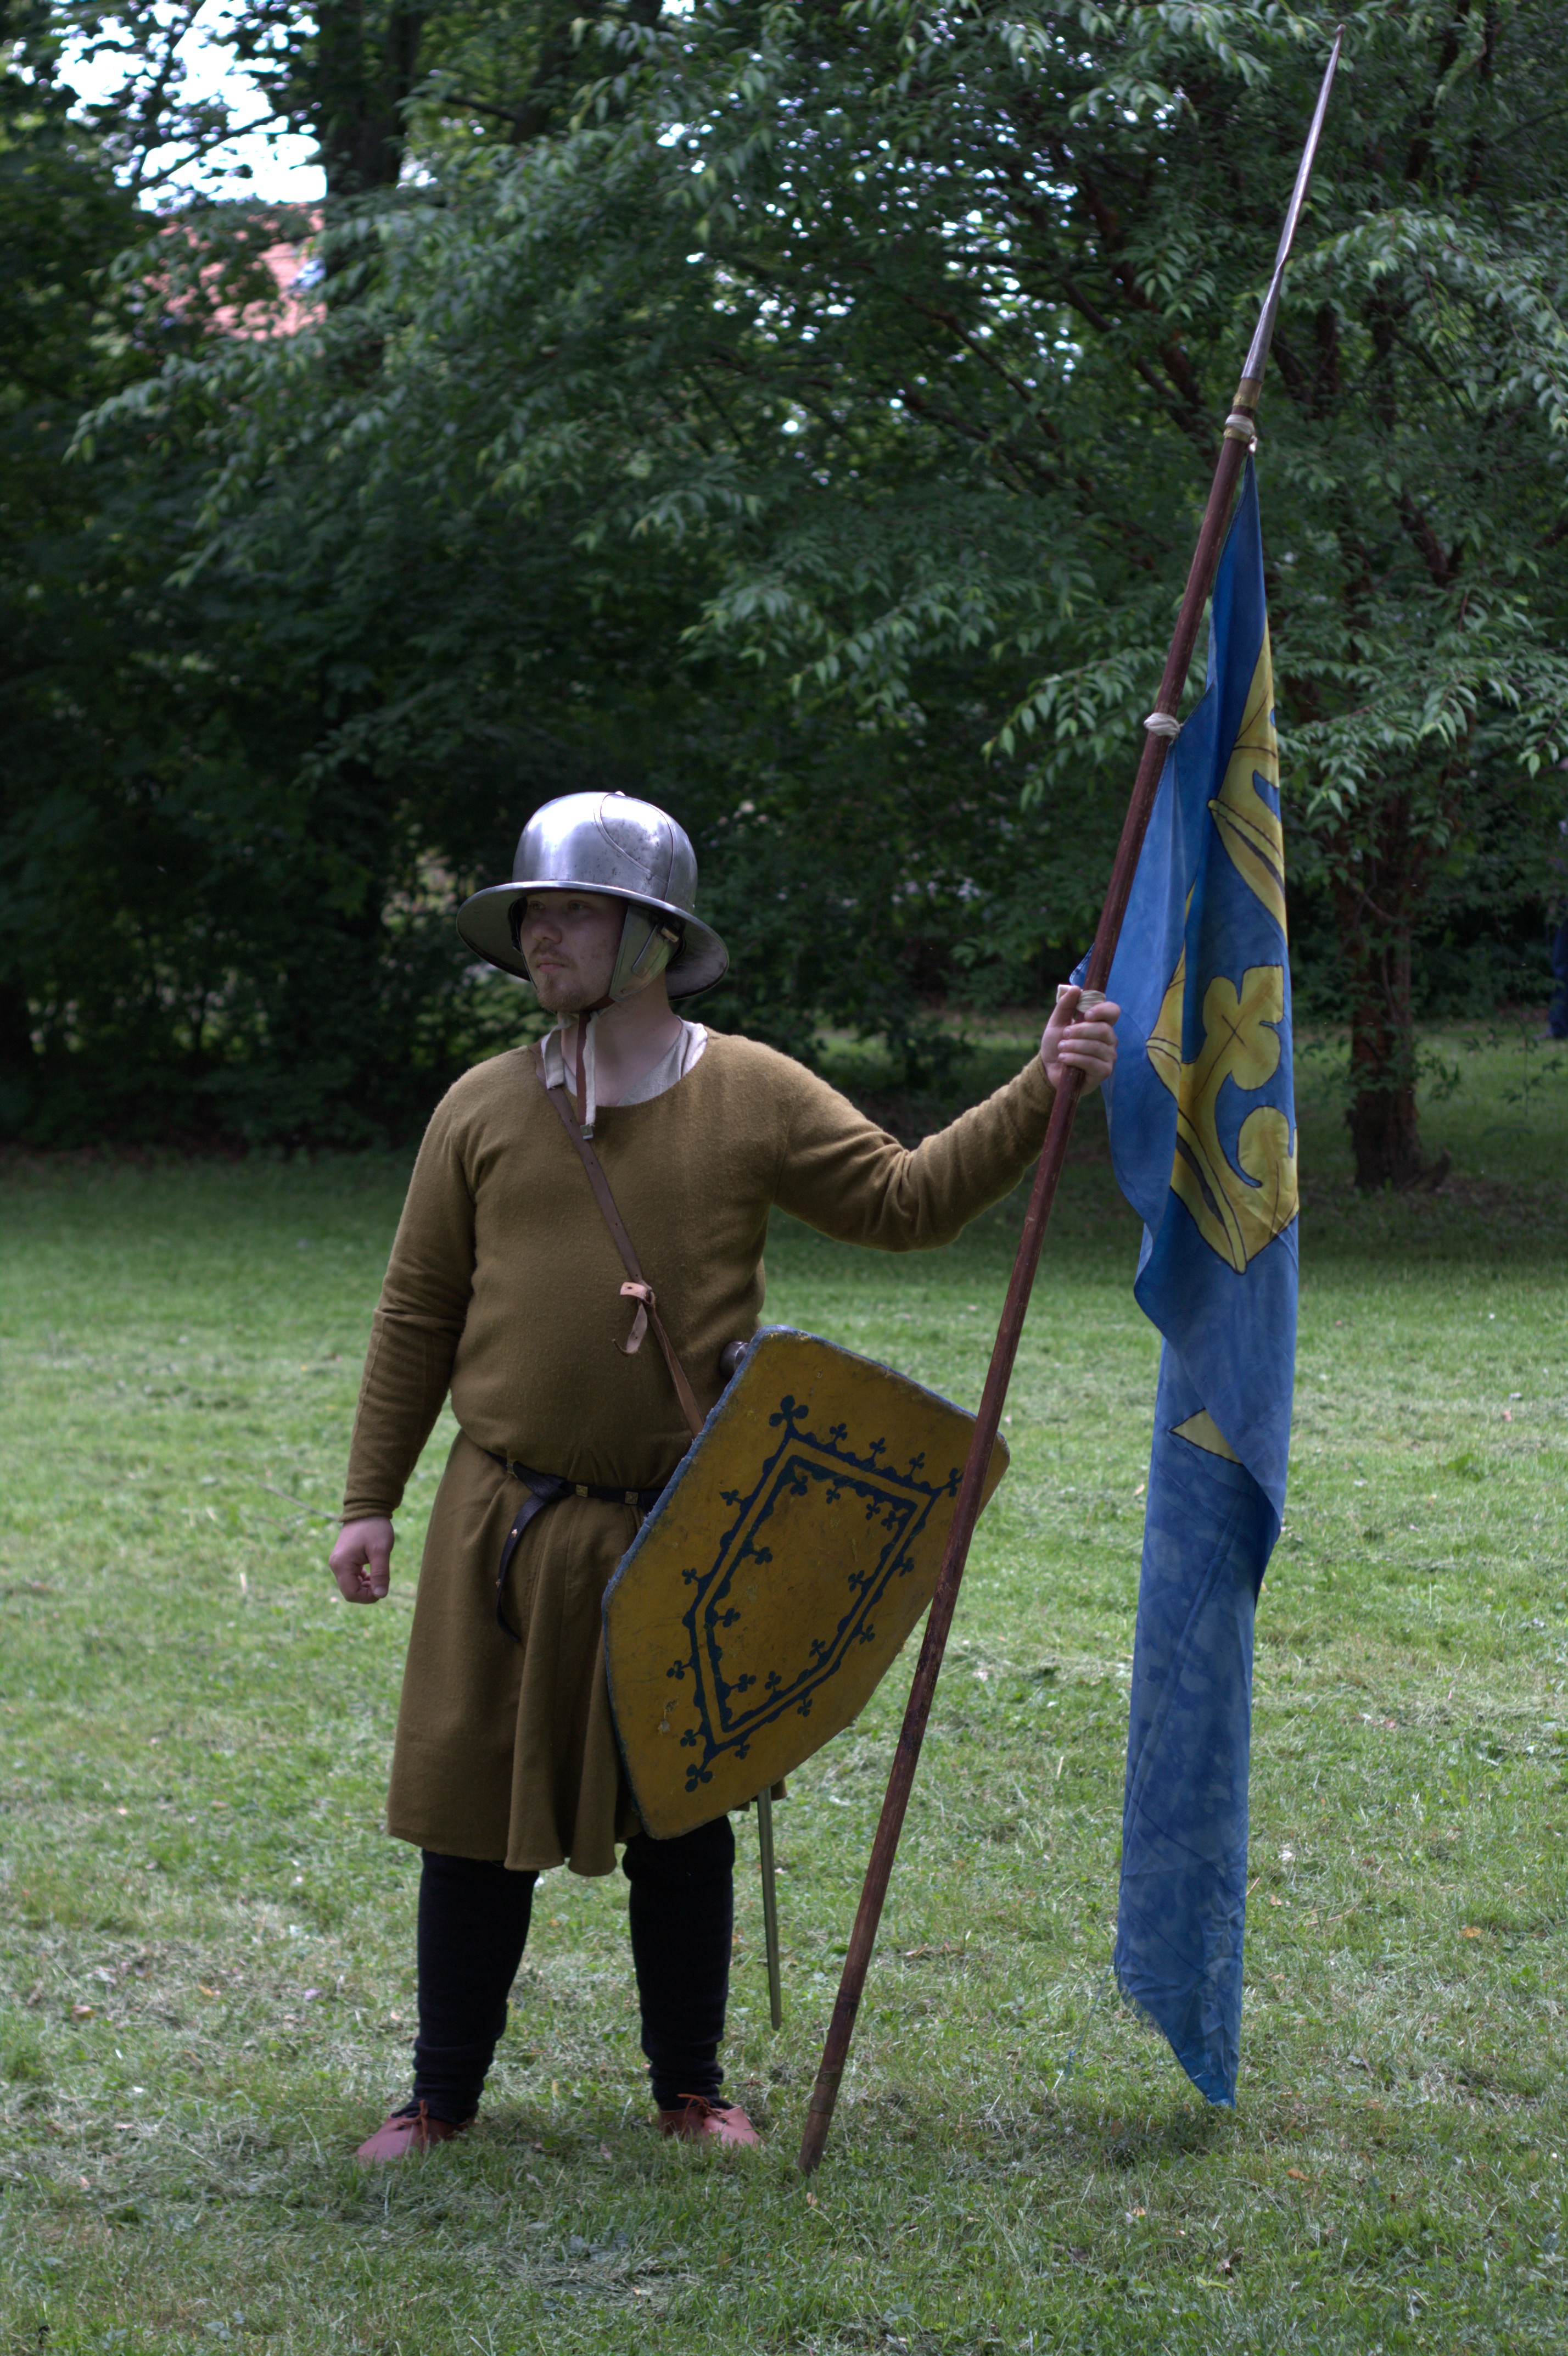 A gunner acting as a levied peasant during a display, Lund, 2012